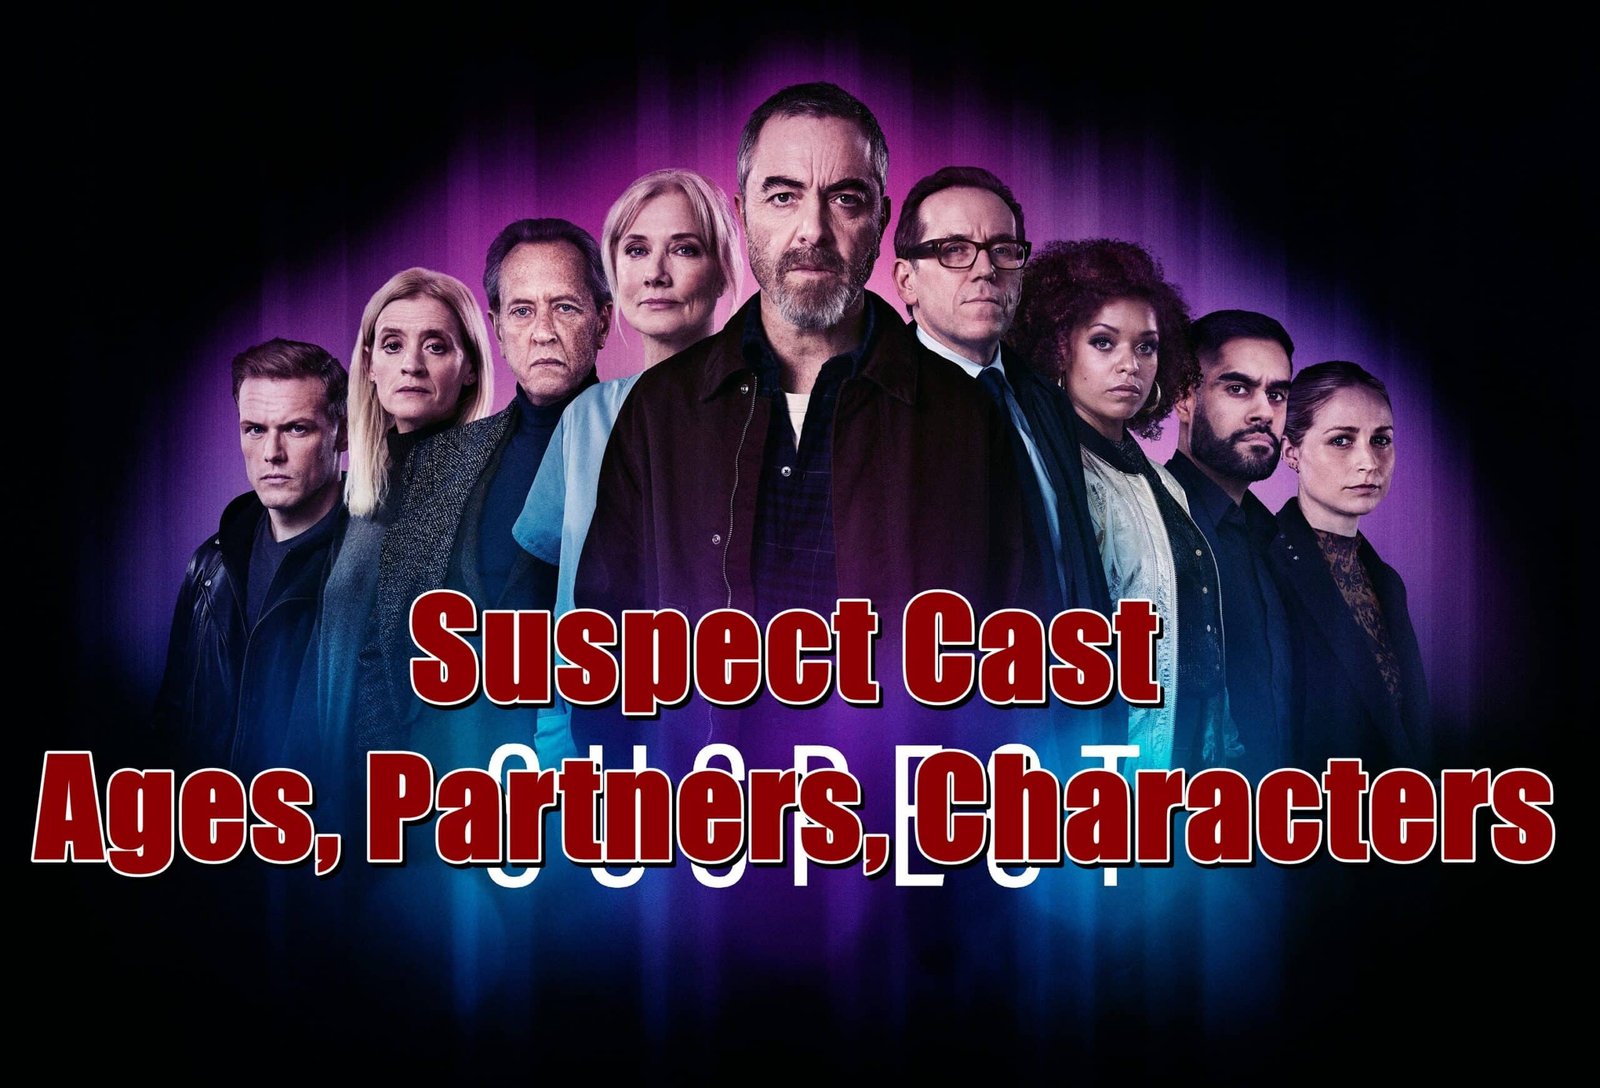 Suspect Cast - Ages, Partners, Characters